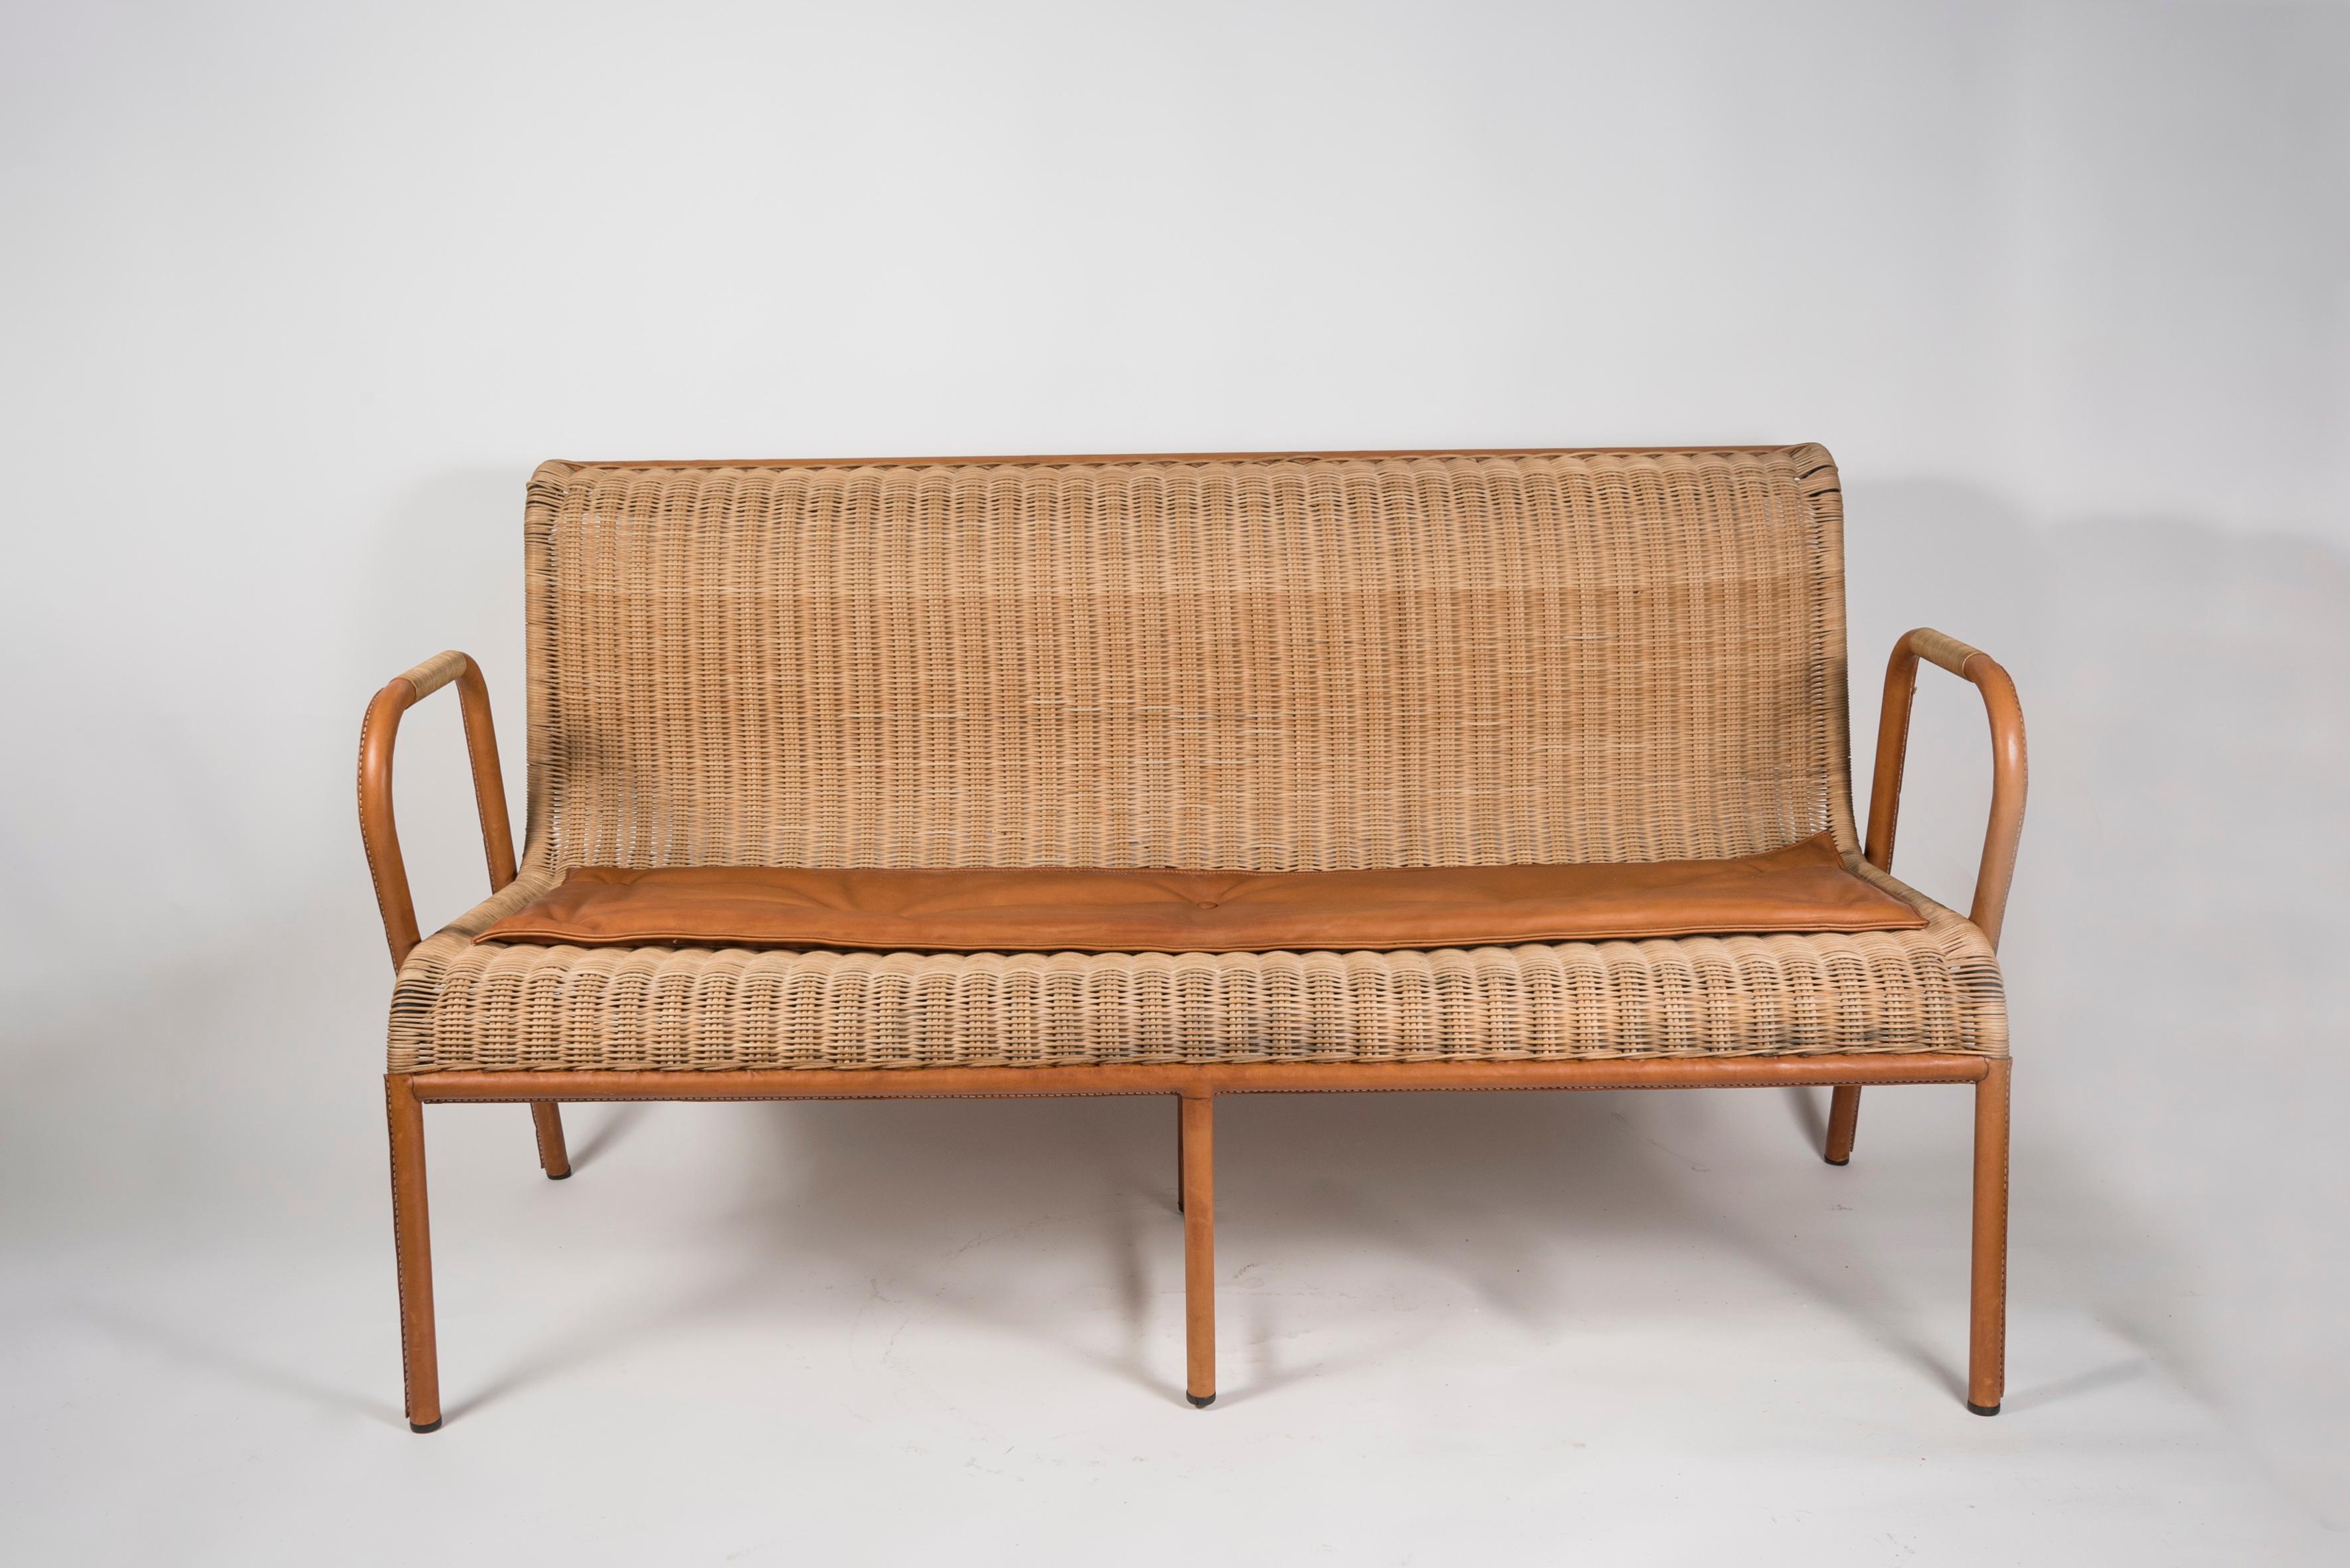 1950's Stitched leather and rattan sofa by Jacques Adnet.